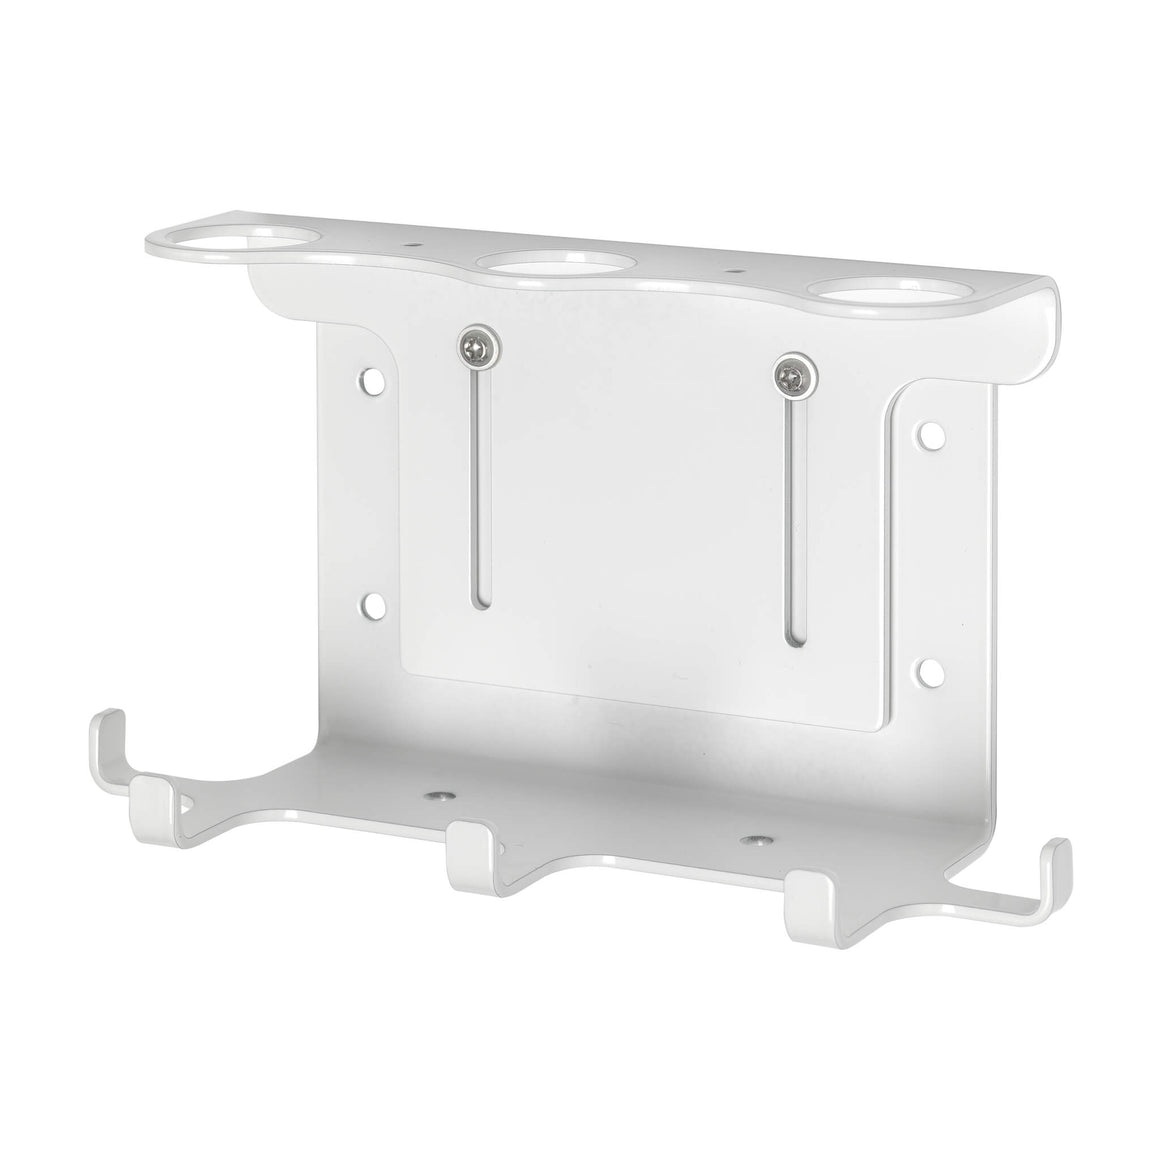 Triple 300ml Security Wall-Mounted Holder - Satin White